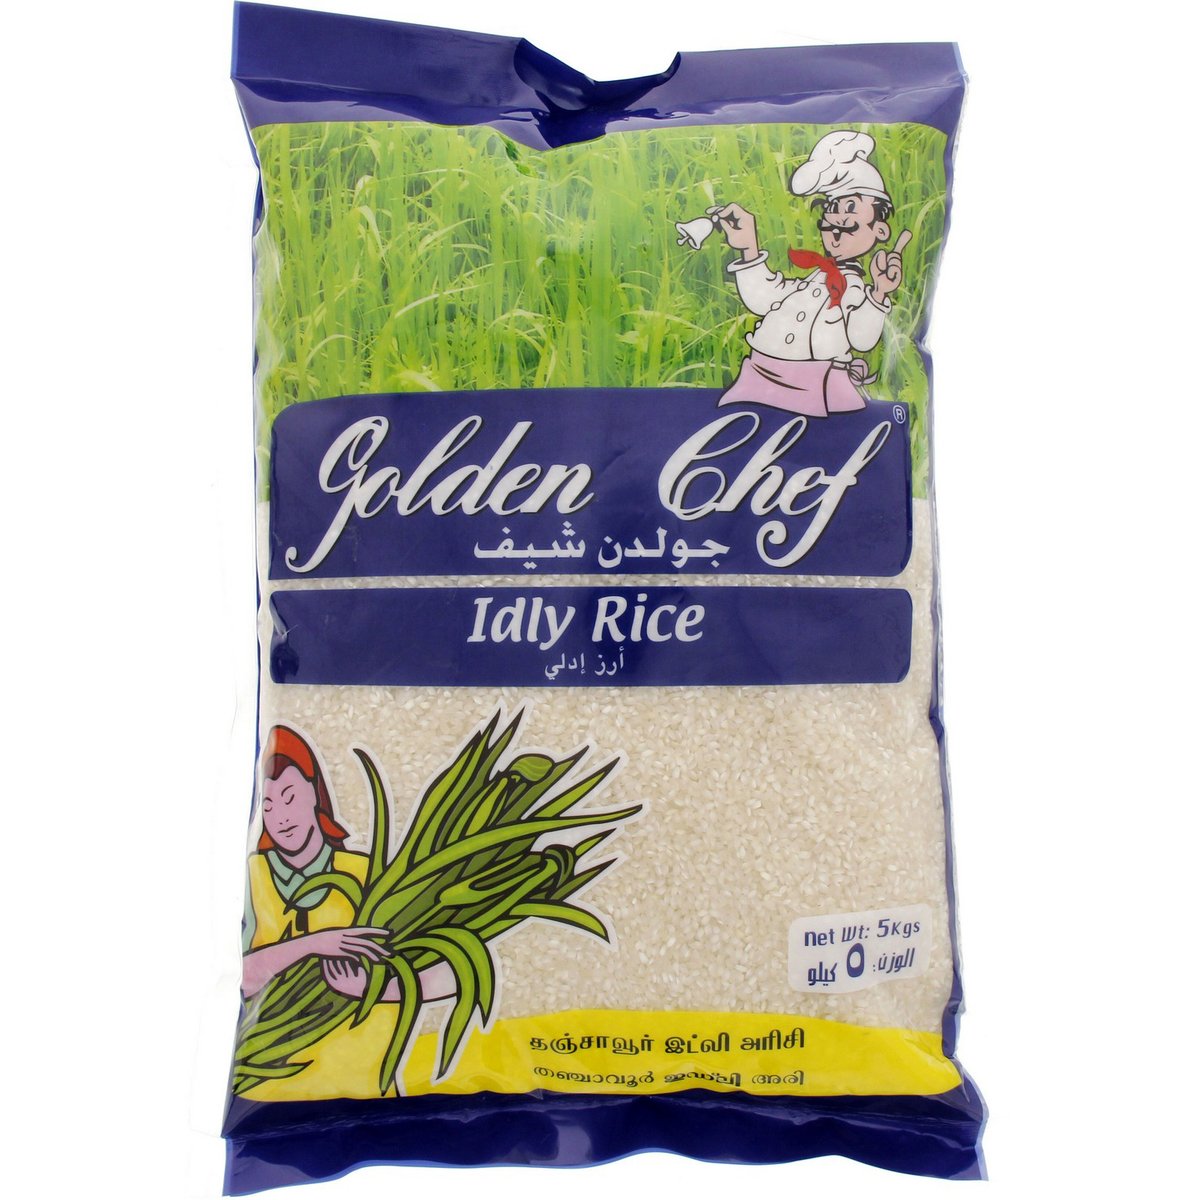 Golden Chef Idly Rice 5 kg